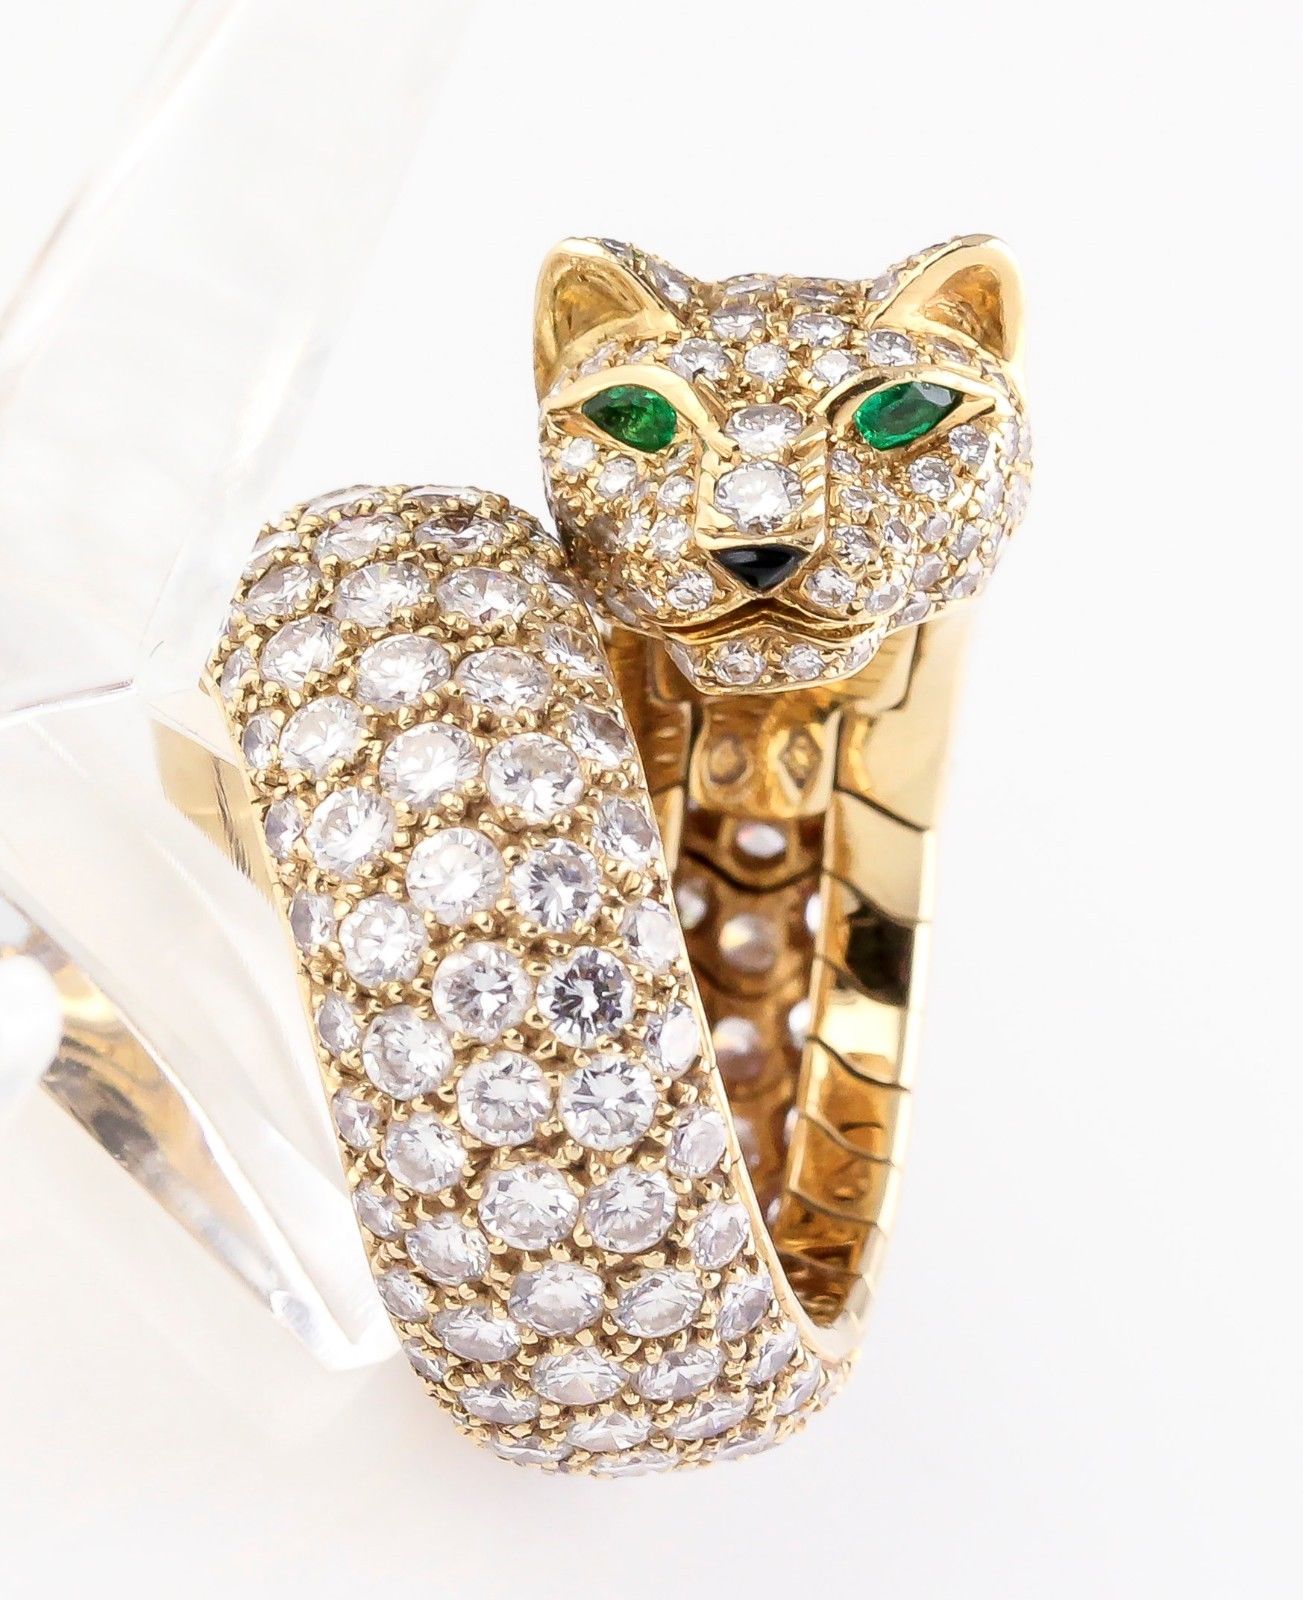 CARTIER PANTHER Diamond Emerald Enamel and 18K Gold Ring